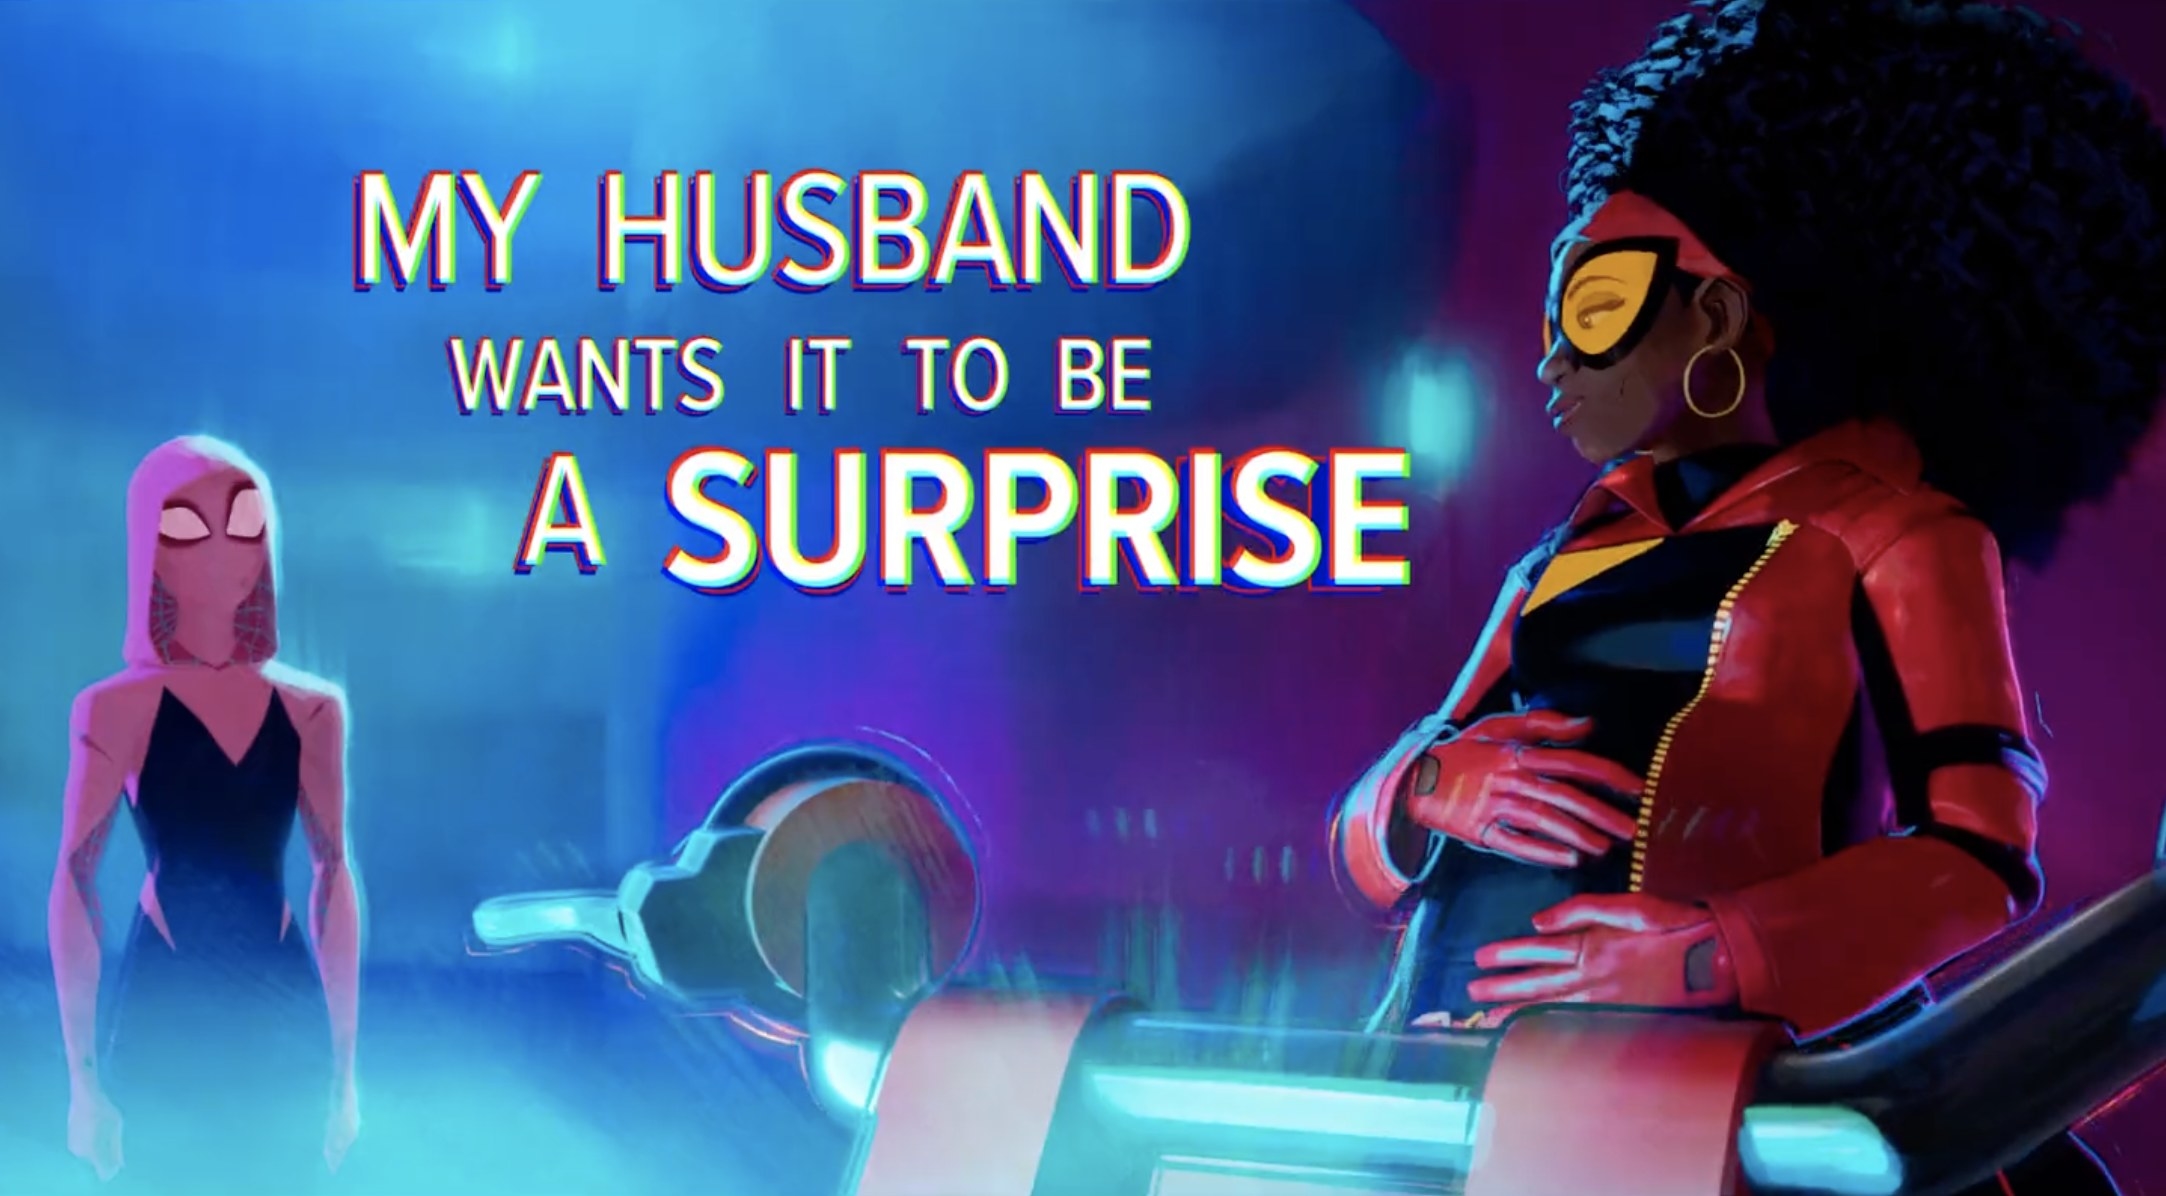 Spider-Woman holds her bump while talking to Gwen with the caption &quot;My husband wants it to be a surprise&quot;